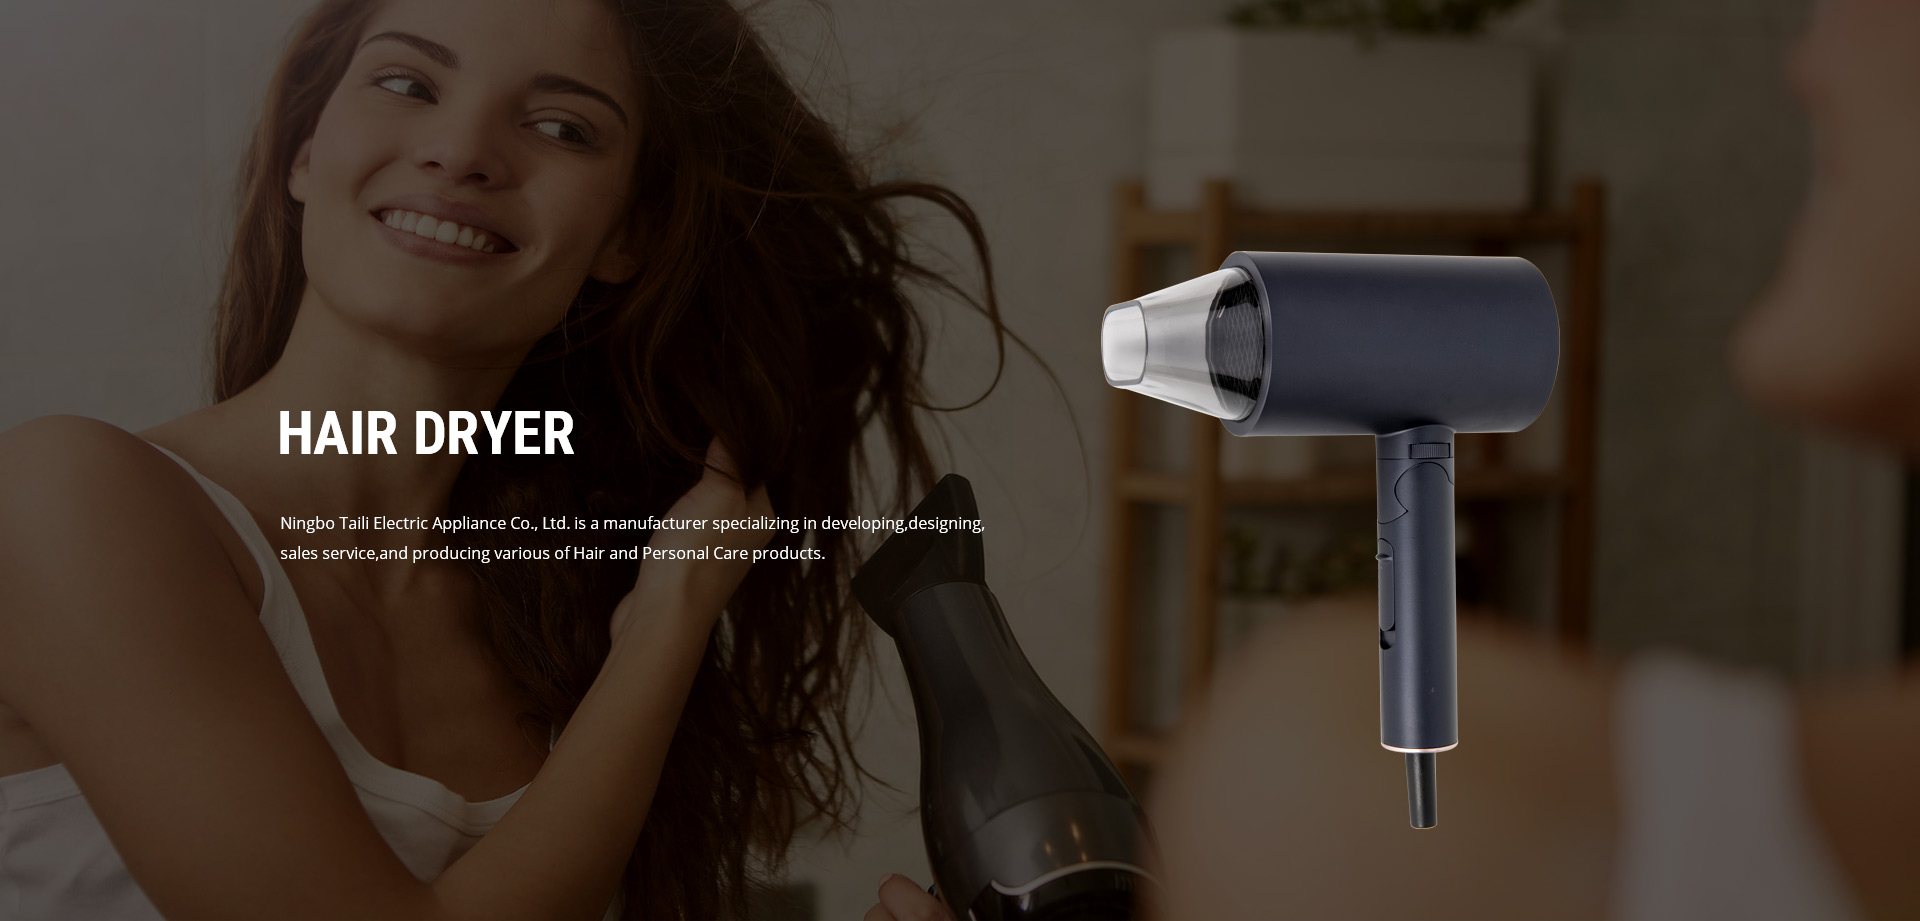 hair dryer products banner